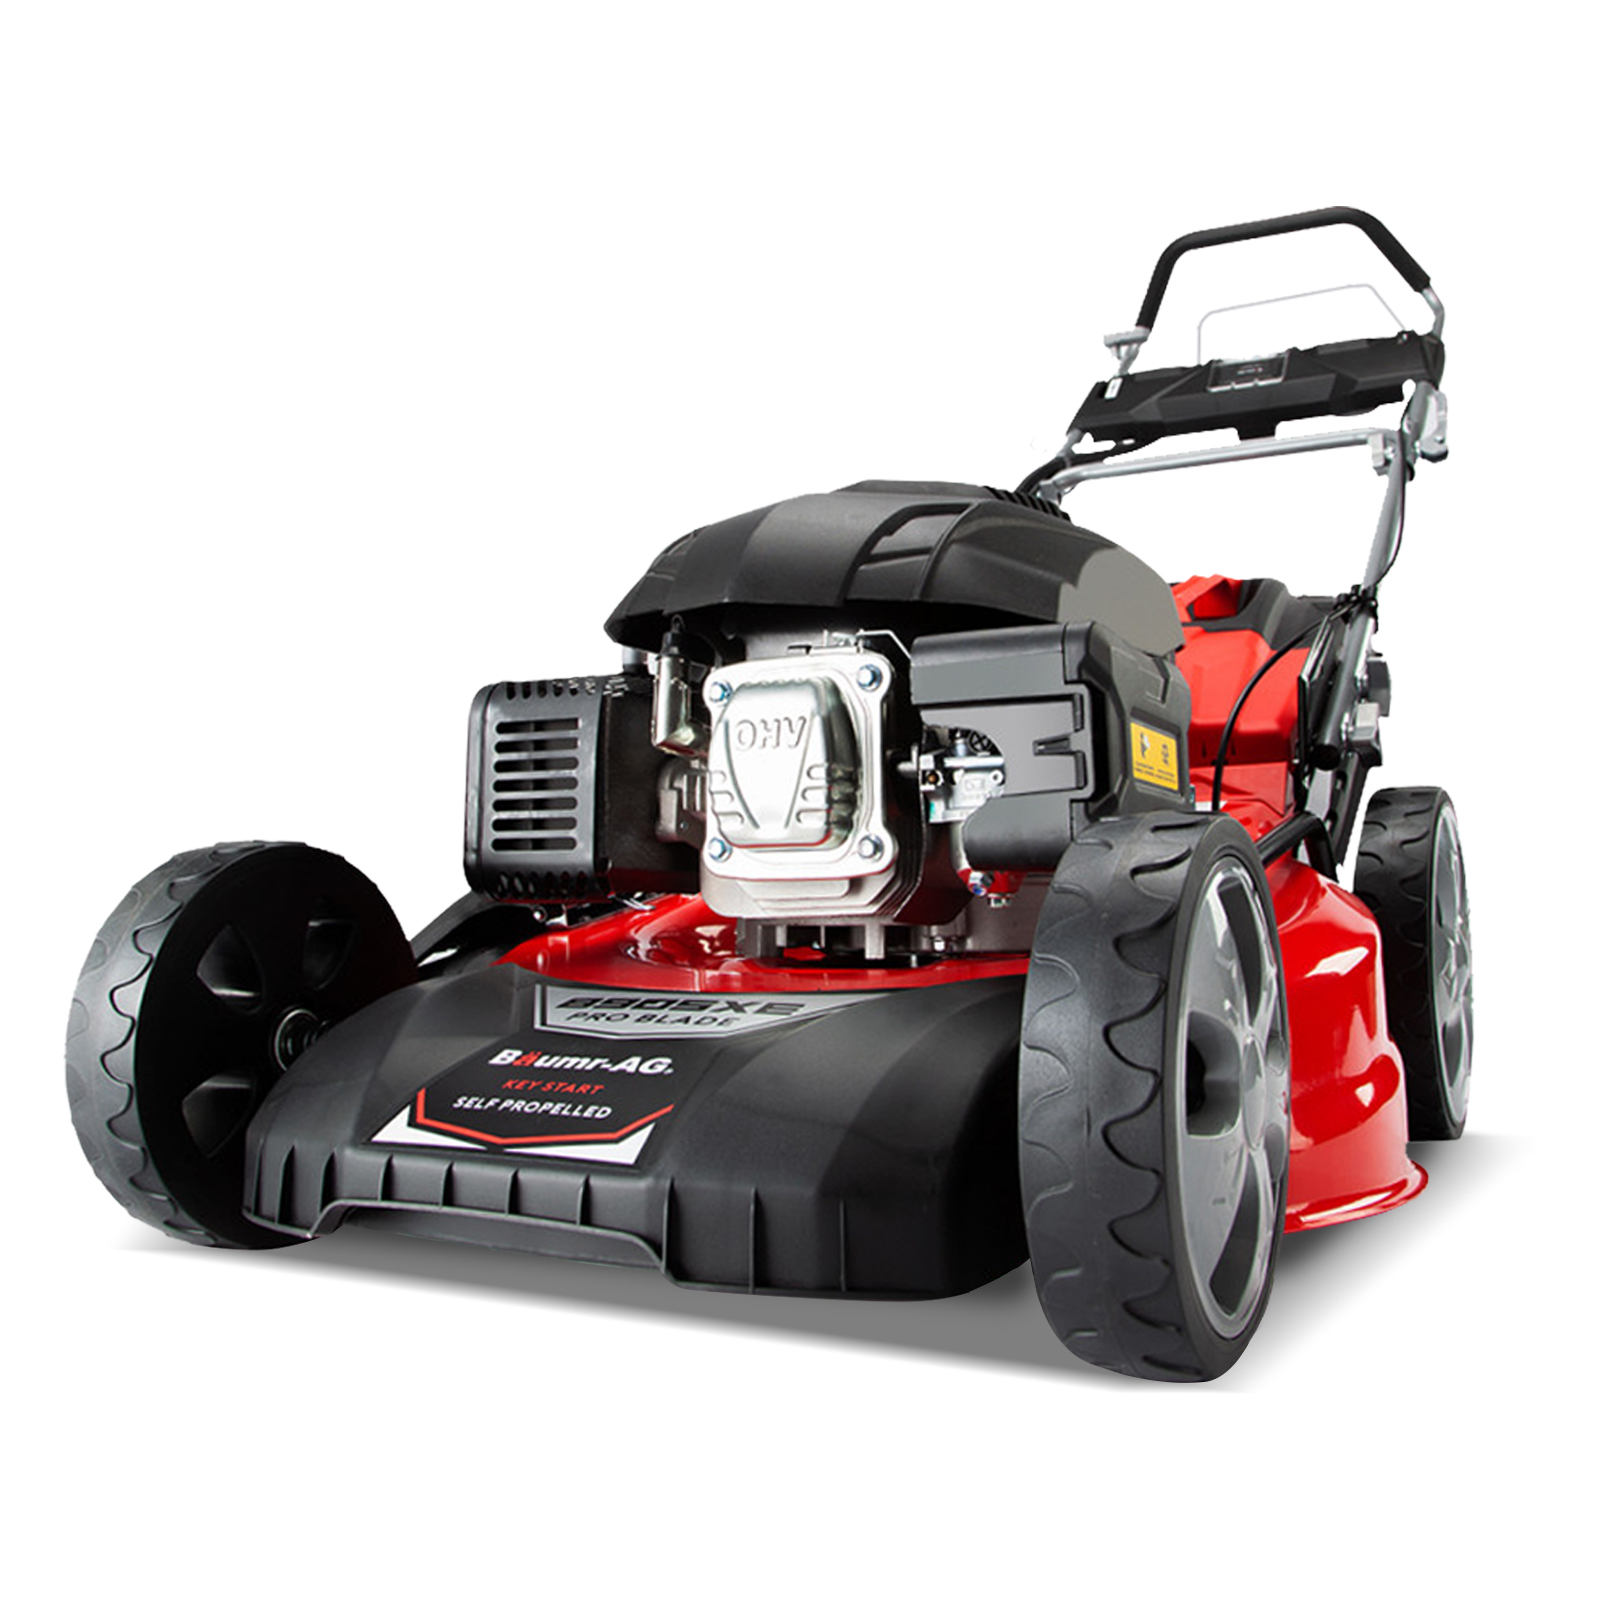 Baumr-AG 21" 248cc Self-Propelled Lawn Mower, Electric Start 4 in 1